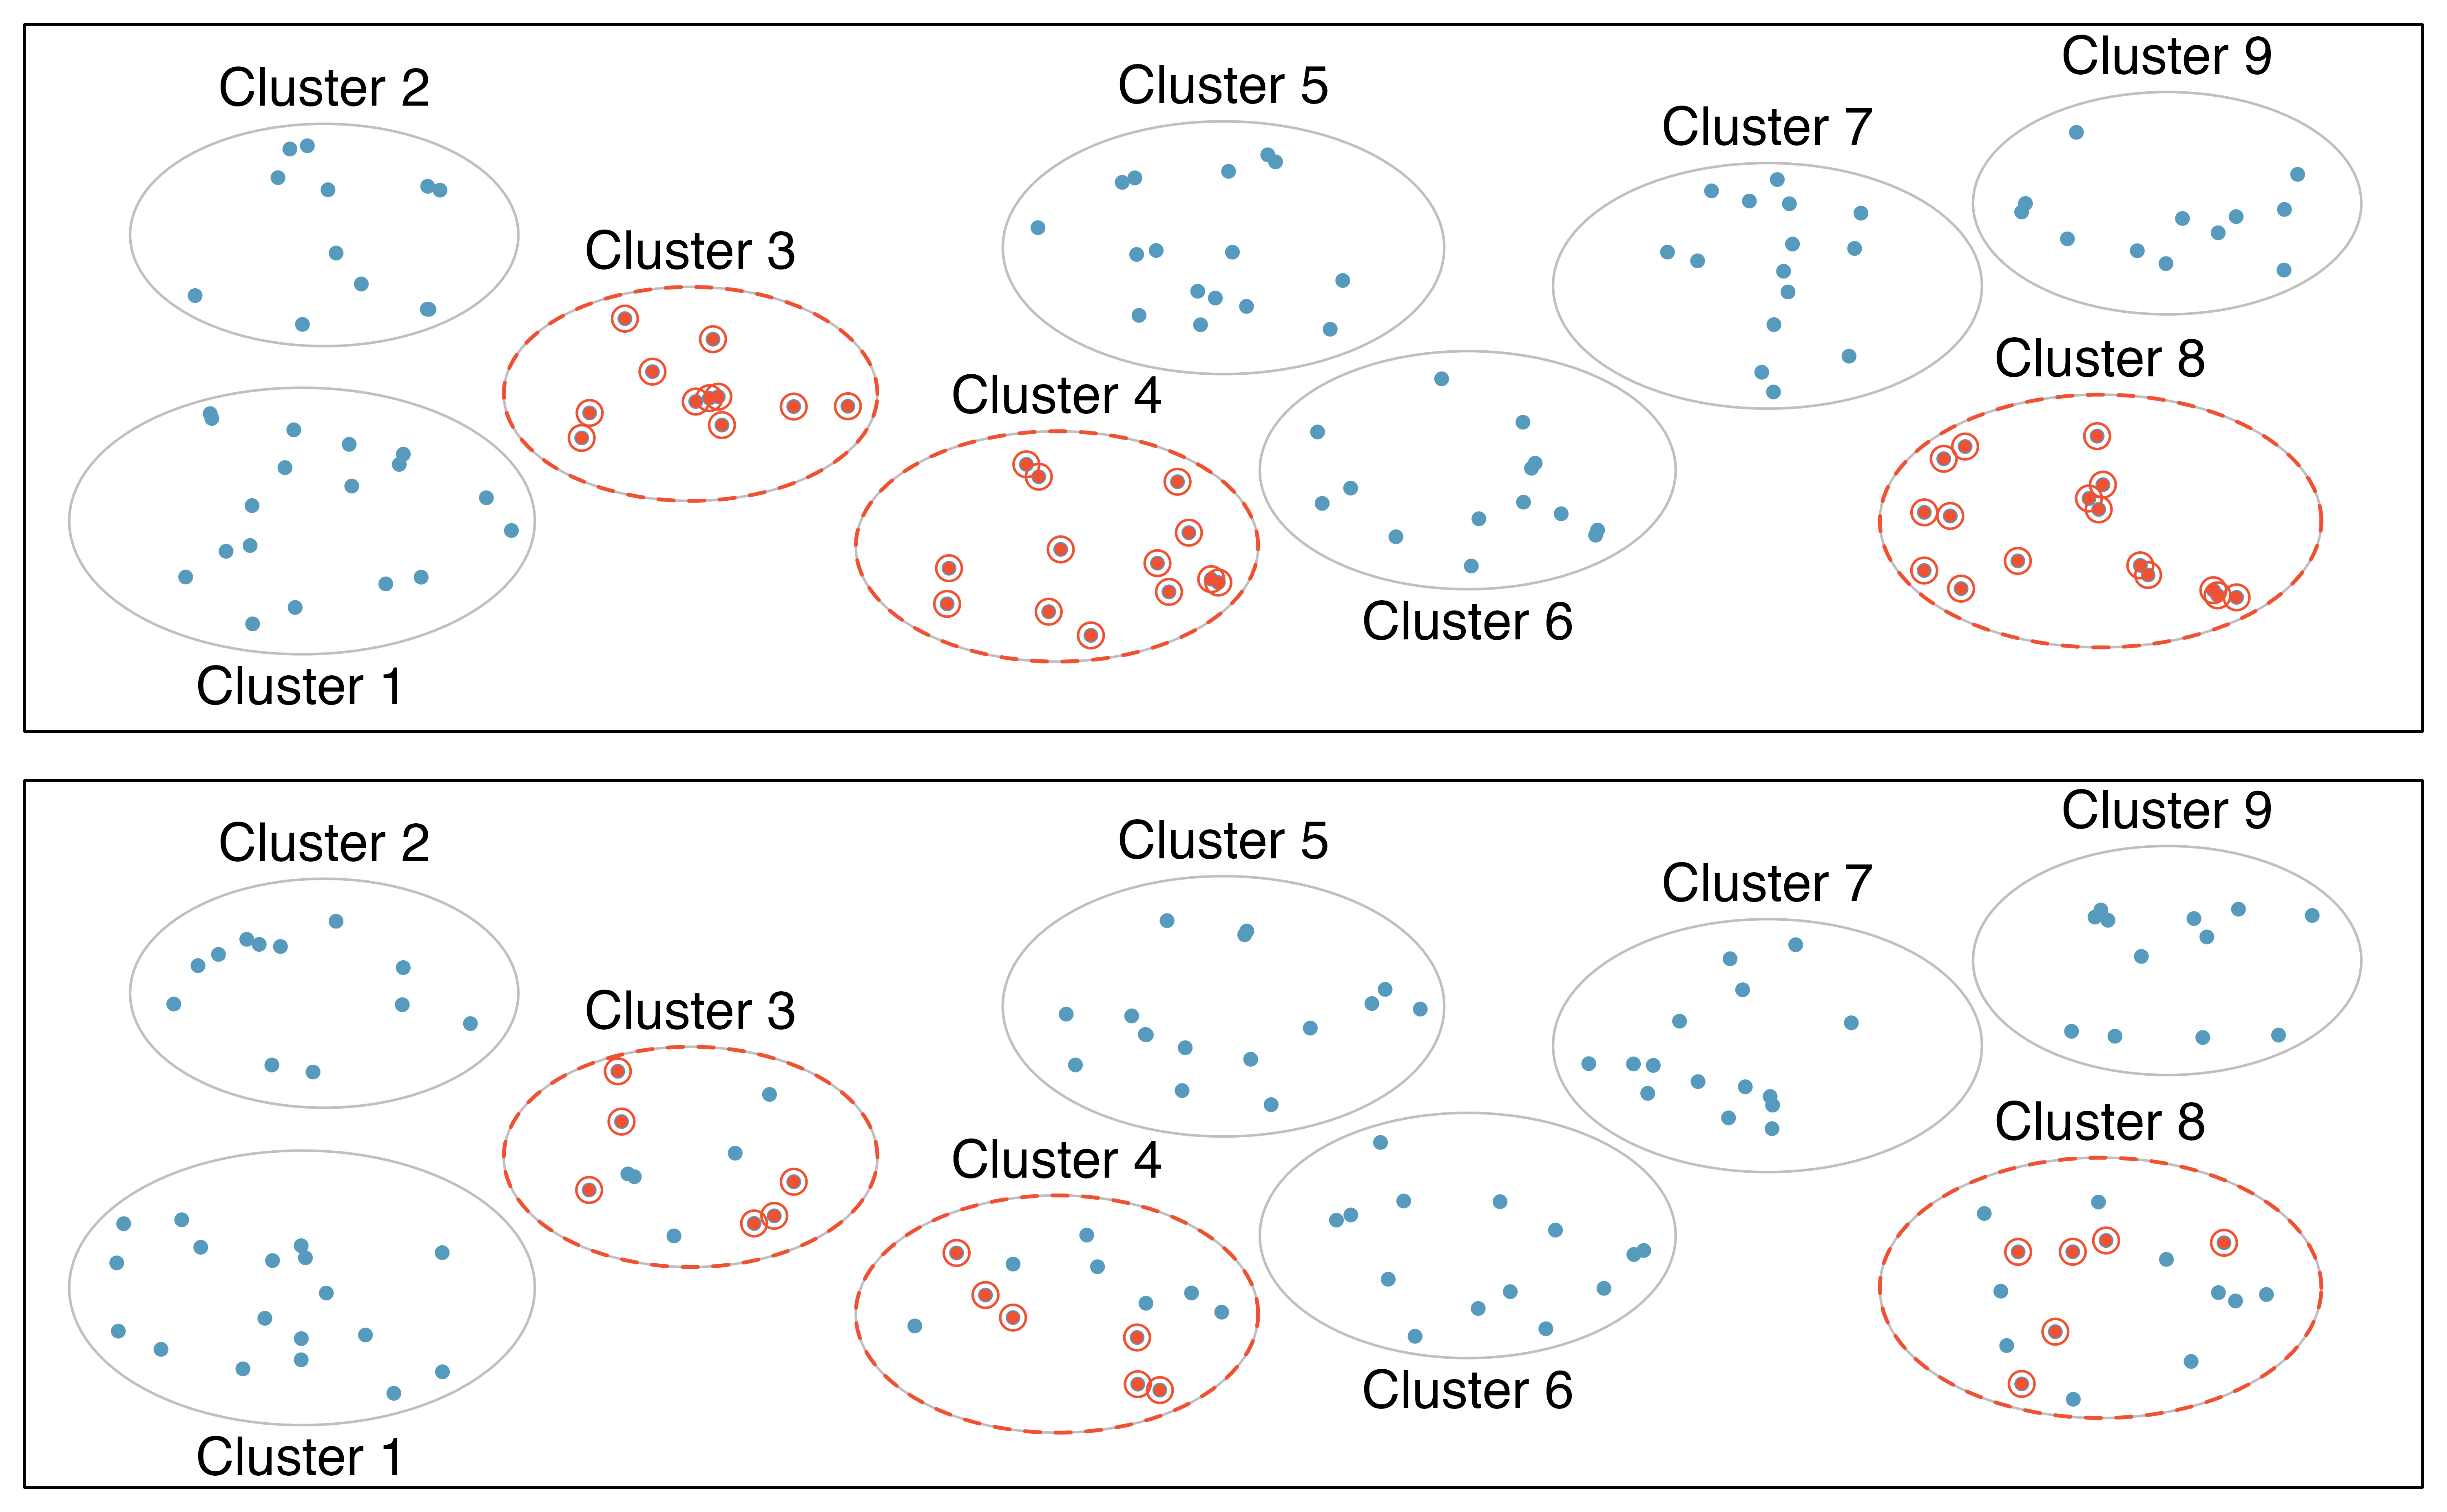 In the top figure, dots are grouped into clusters, three clusters are selected, and every dot (i.e., all individuals) from each of the three clusters are sampled.  In the bottom figure, dots are again grouped into clusters and three clusters are selected.  However, random sampling is applied so that a random sample from each of the three selected clusters is taken.